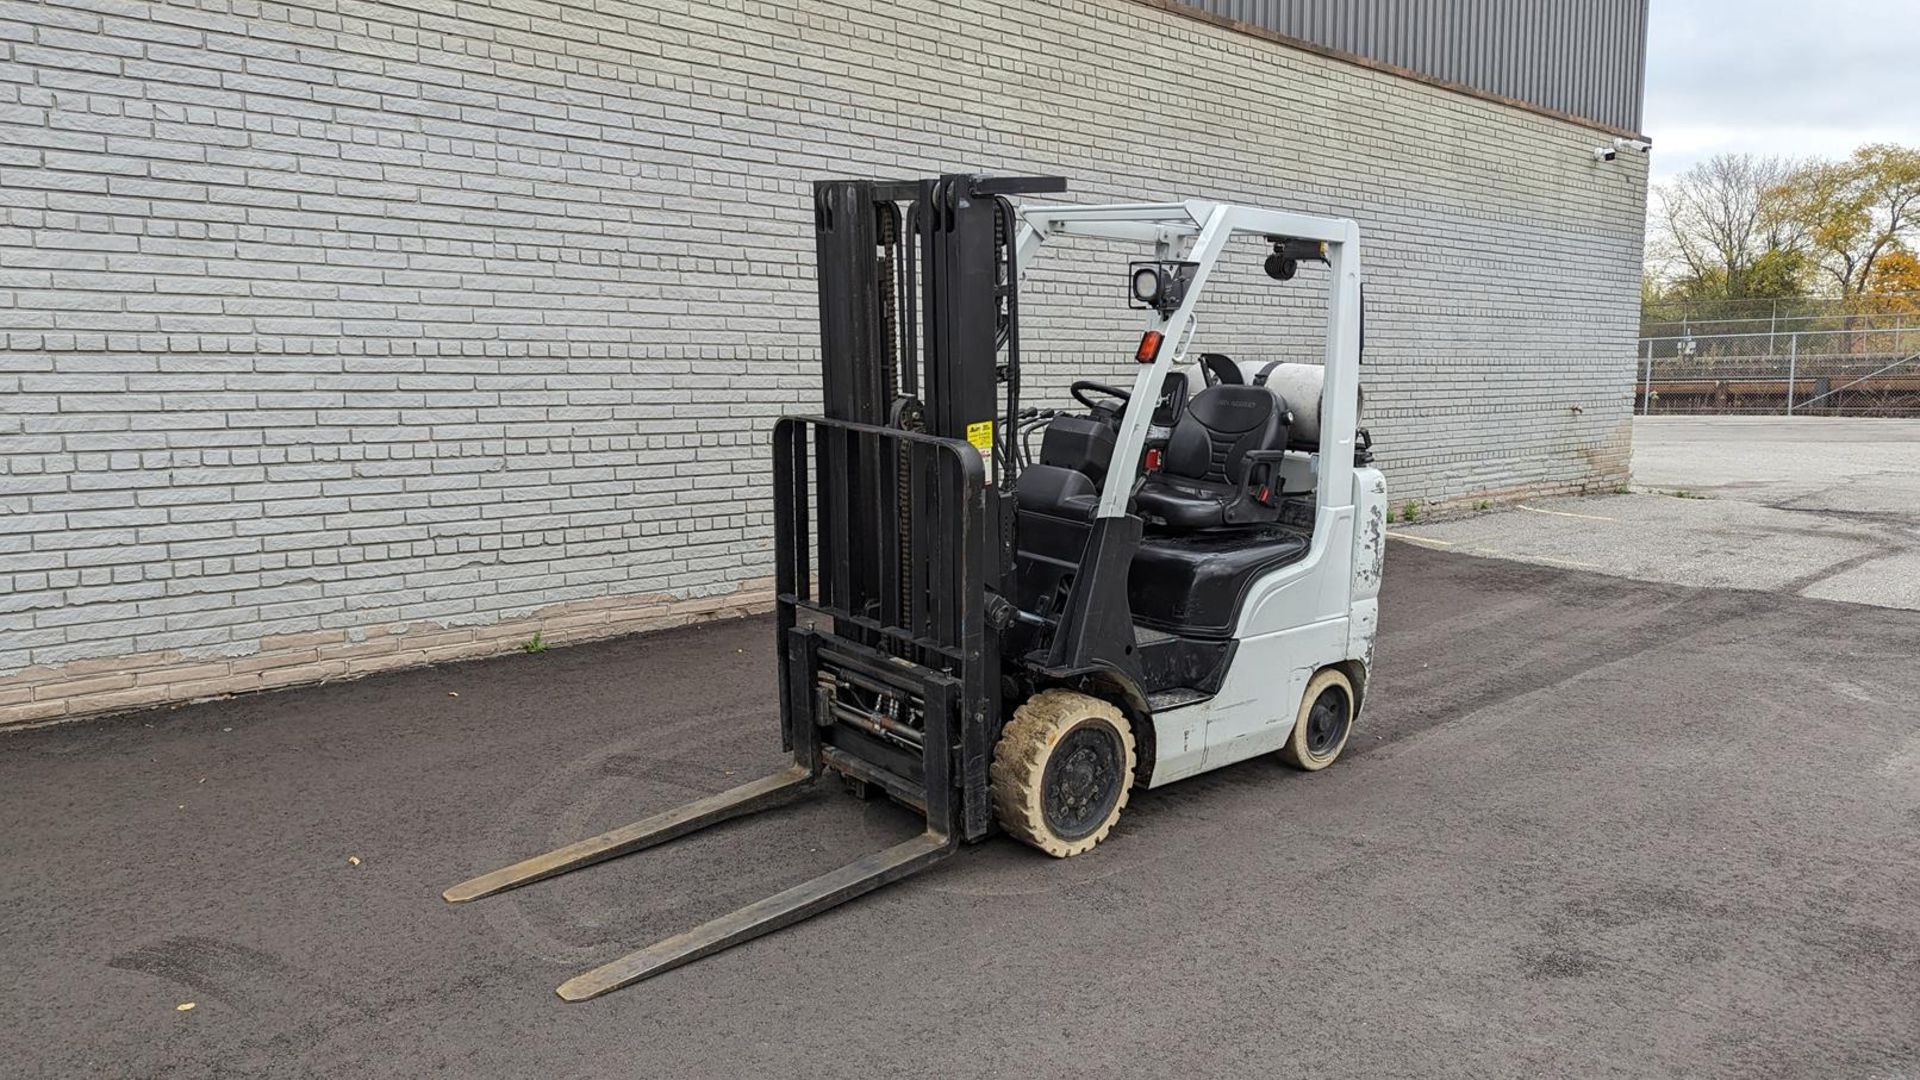 2018, UNICARRIERS, MCP1F2A25LV, 4,400 LBS., 3 STAGE, LPG FORKLIFT, SIDESHIFT